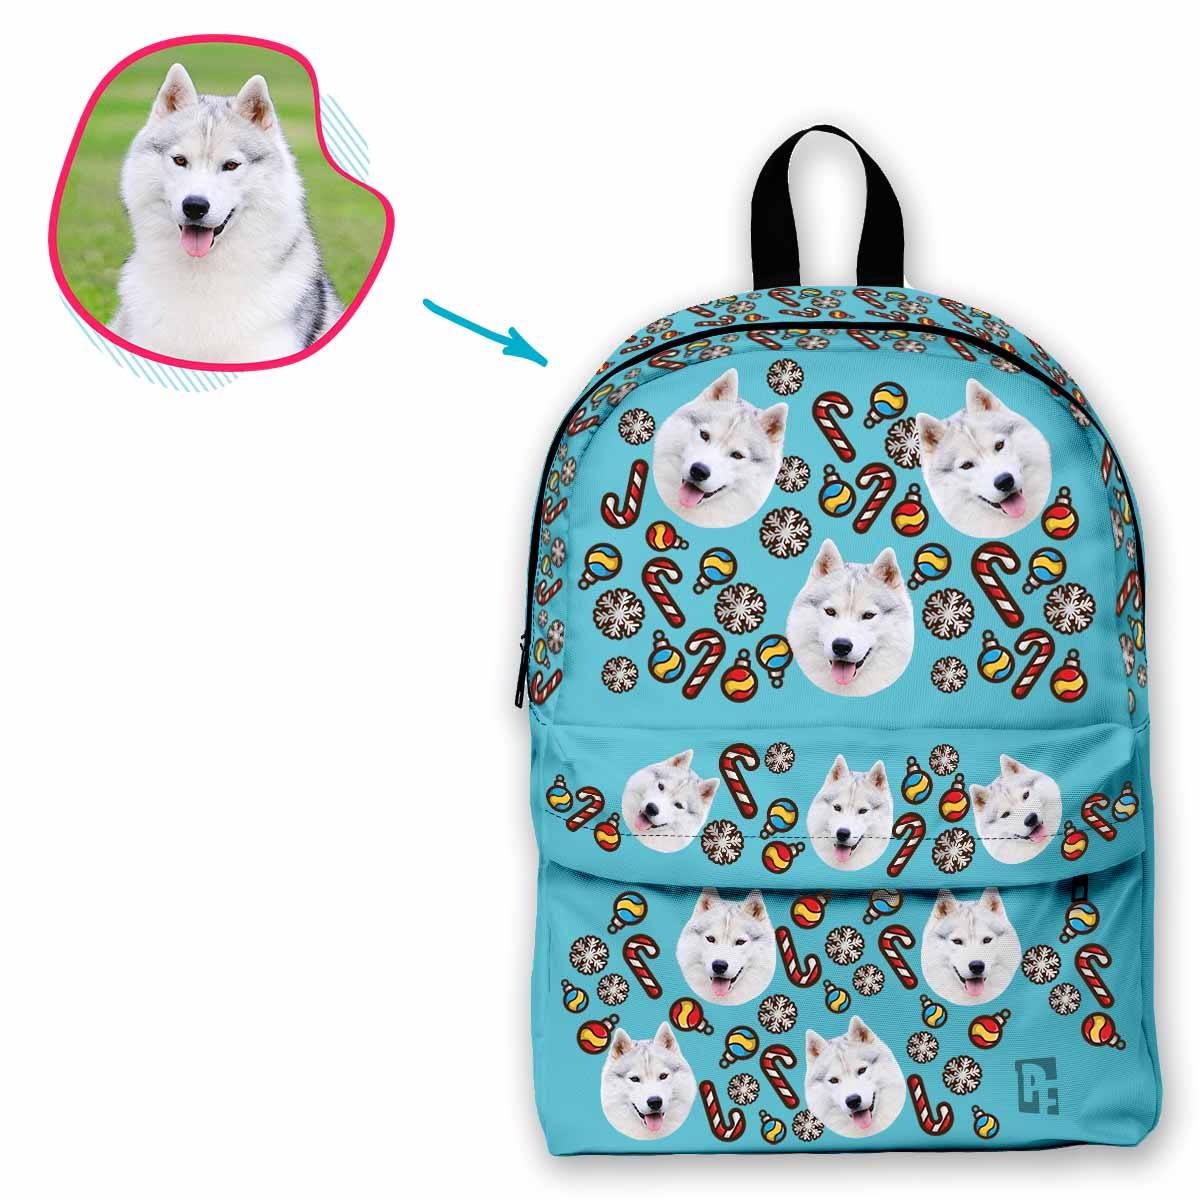 blue Christmas Tree Toy classic backpack personalized with photo of face printed on it